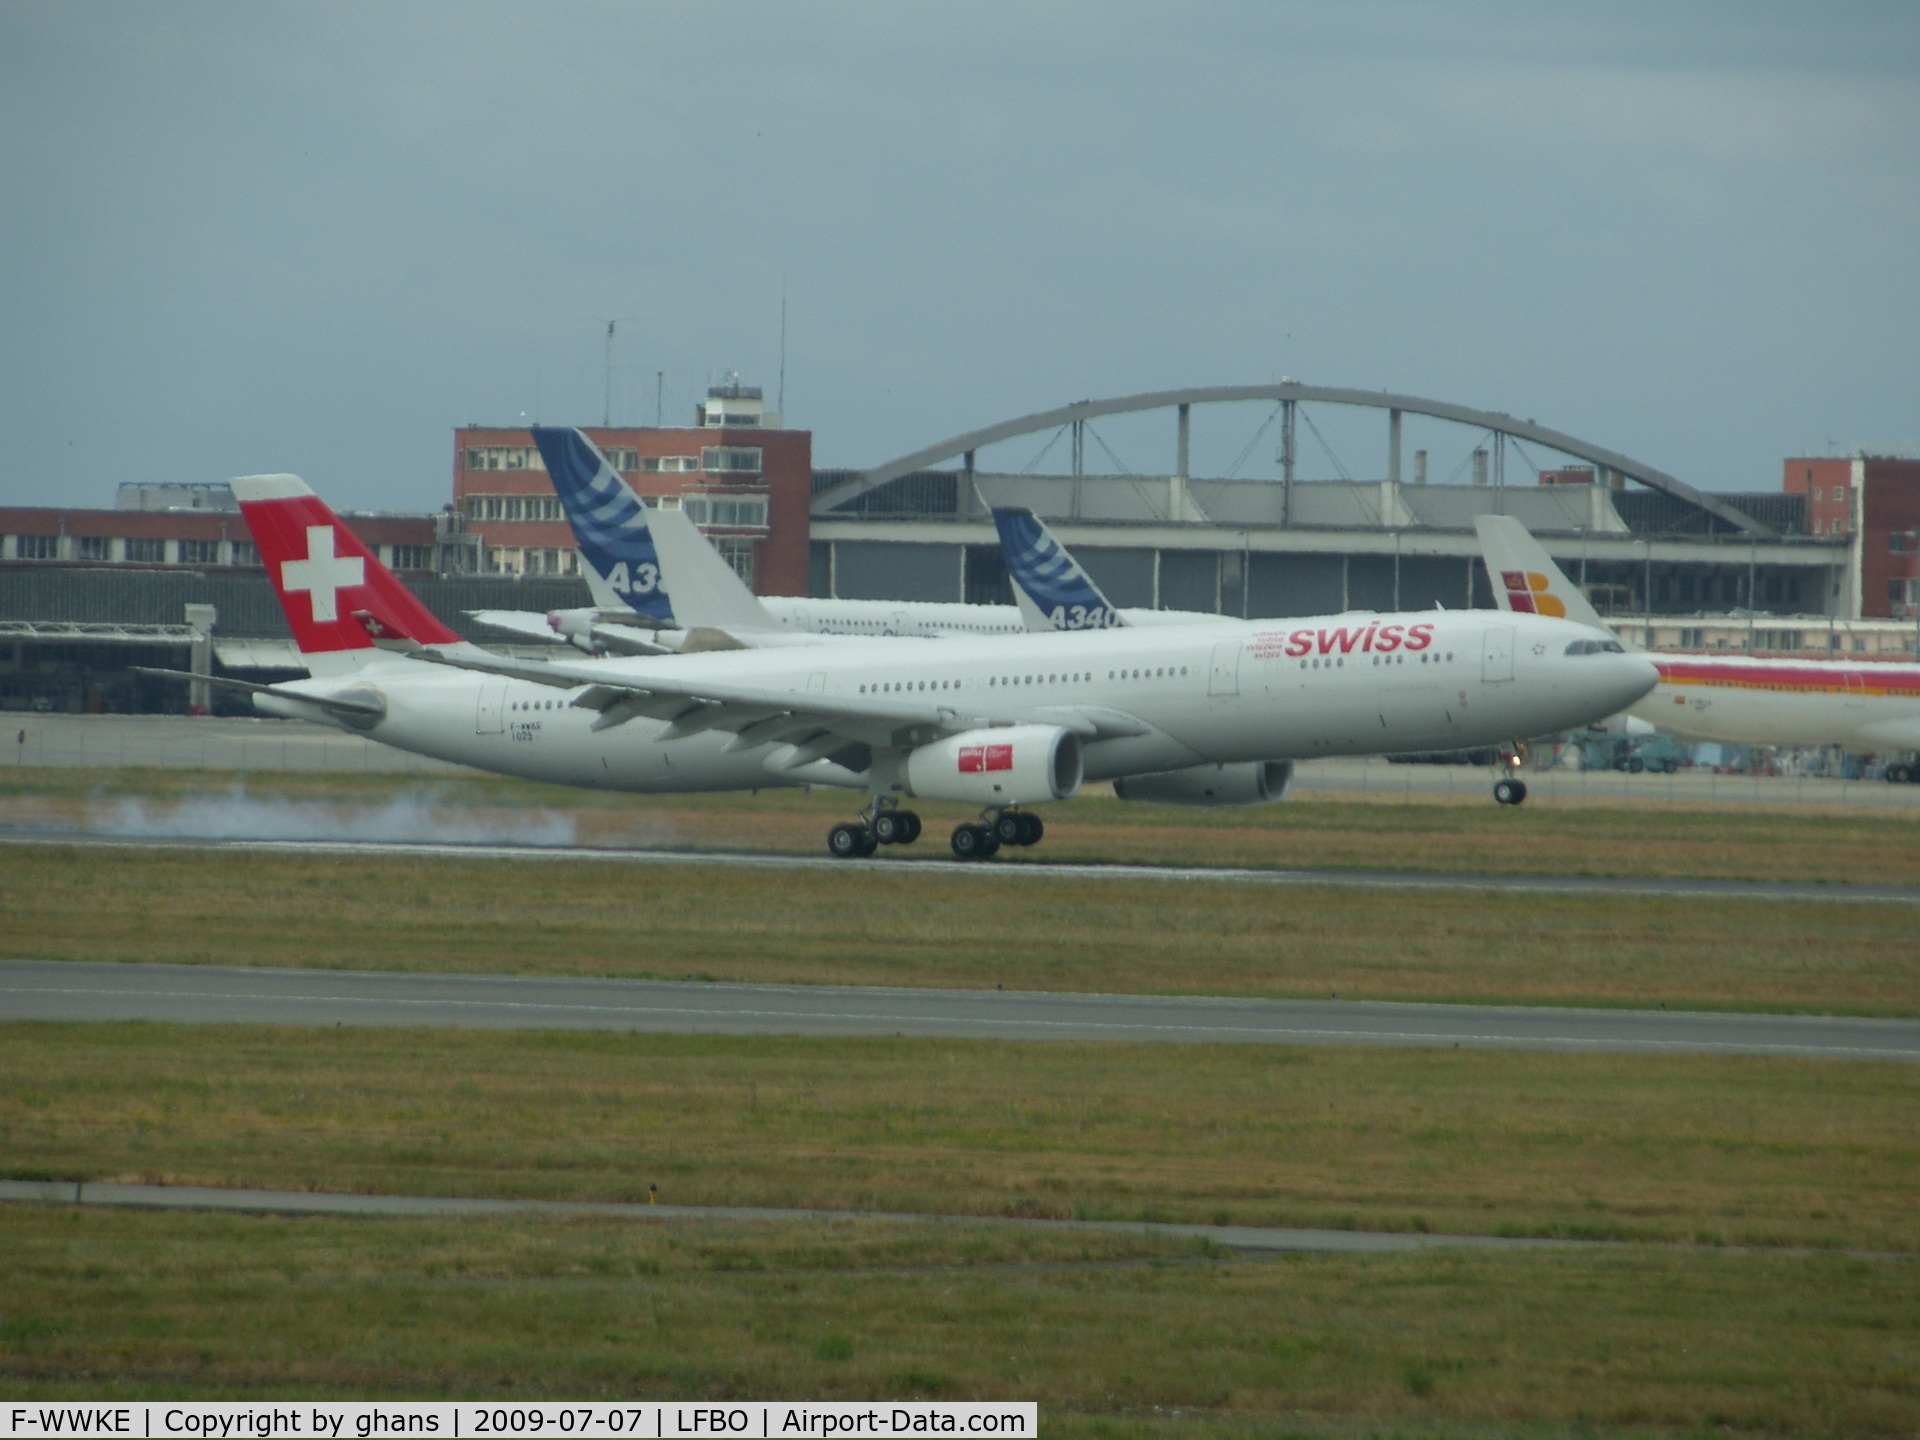 F-WWKE, 2009 Airbus A330-243X C/N 1029, Just landed after a testflight